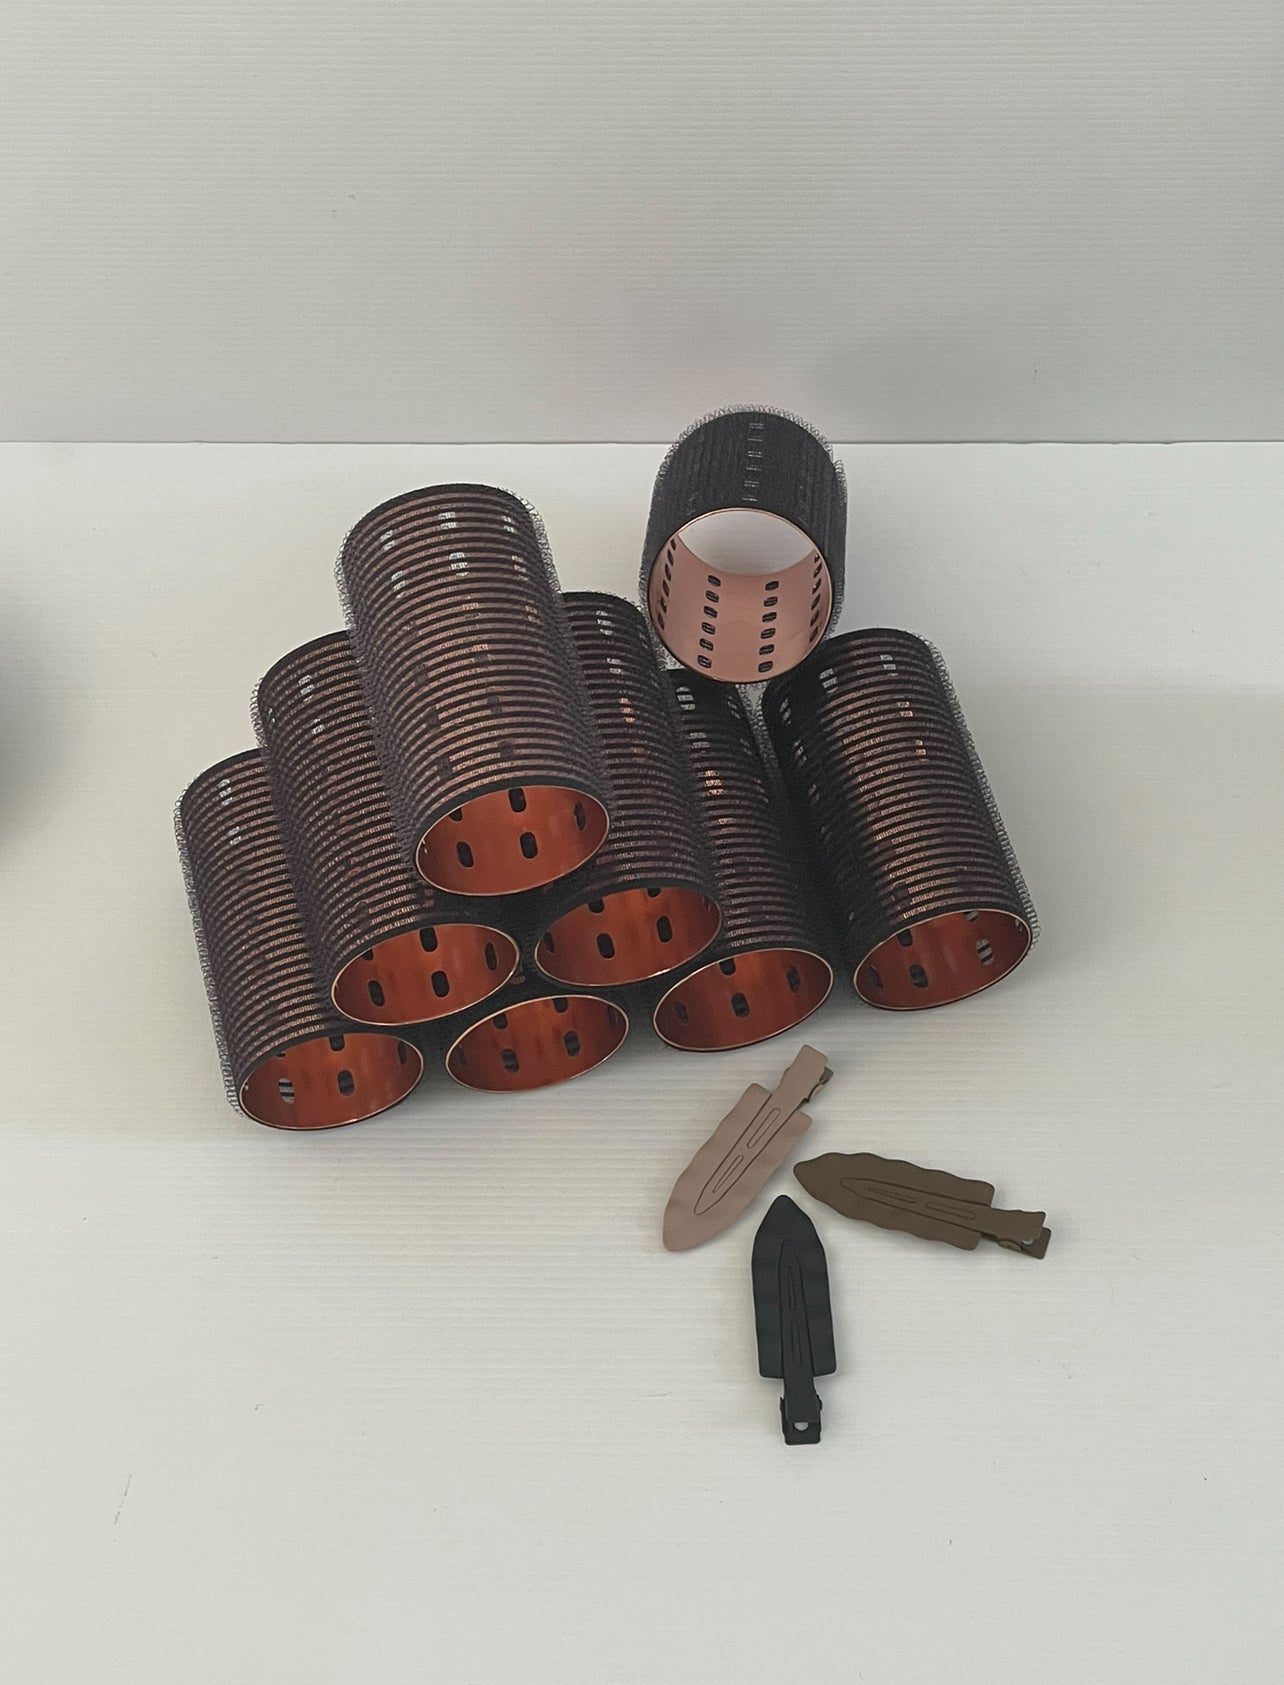 Extra wide professional Velcro hair rollers with Aluminium core and Self Grip Velcro 90mm wide to fit more hair per roller - Black velcro and Rose Gold aluminum core. This is a Large Set which includes 8 large rollers plus Pink Pewter 3 x Creaseless Clips, this set of 6 Velcro Rollers by Phoenix Nationale. Wholesale pricing available please contact us.